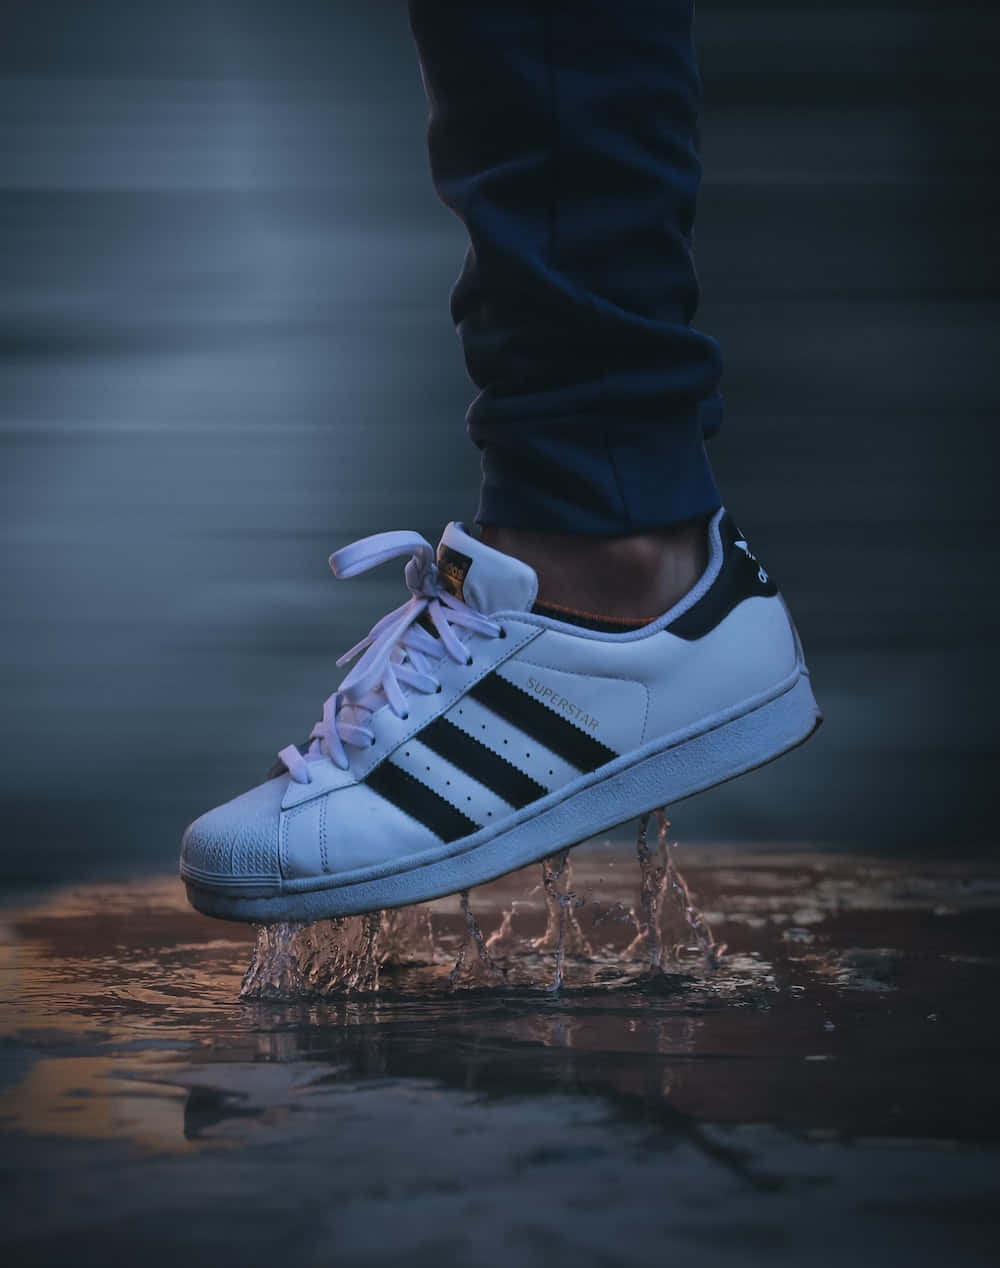 Step Up Your Performance with Iconic Adidas Footwear